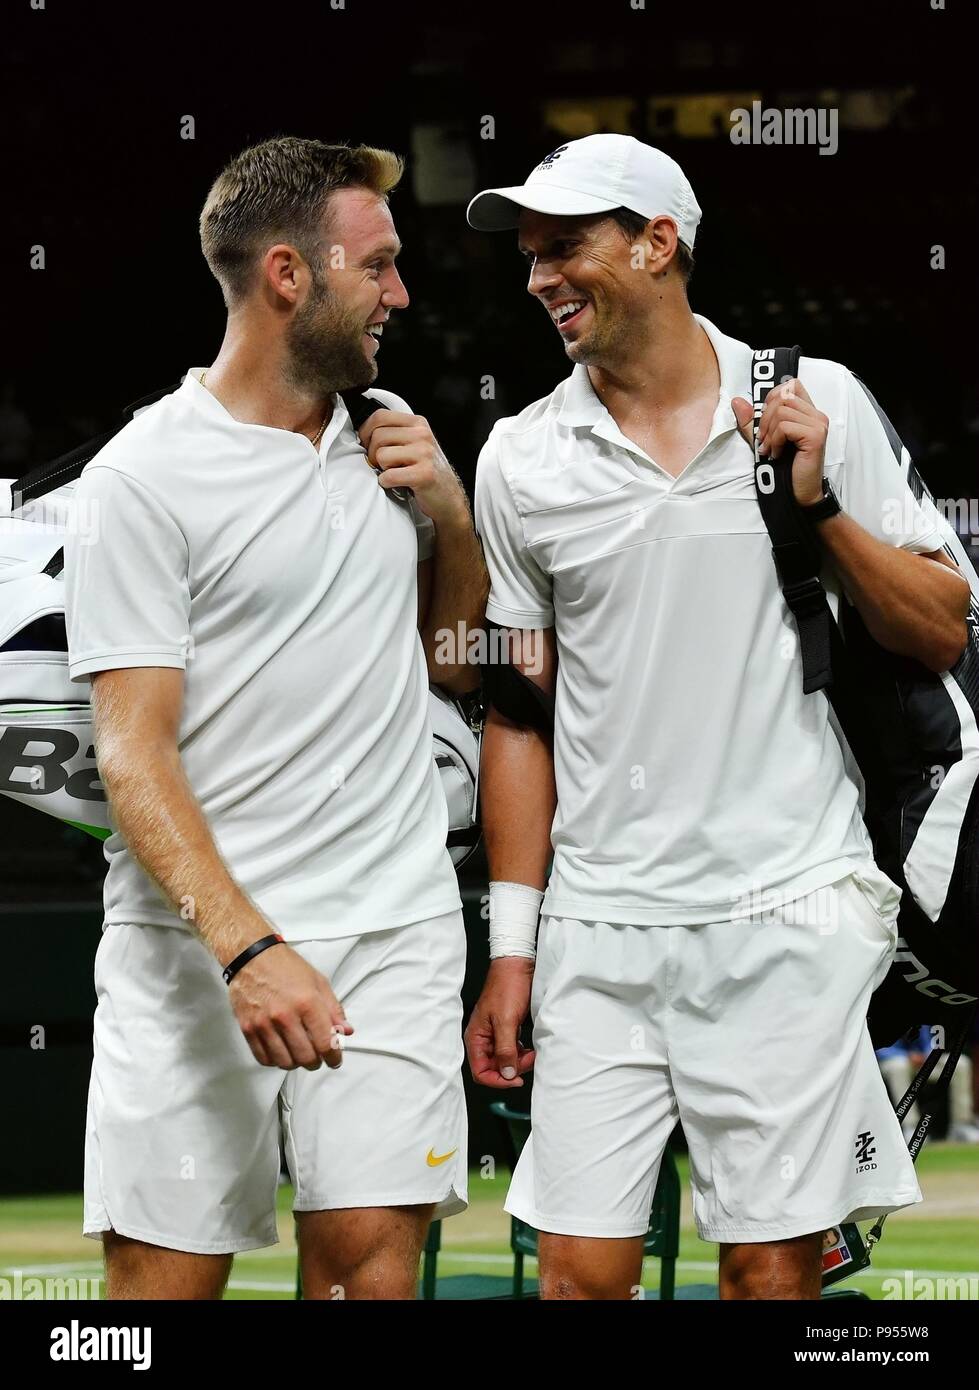 London, Britain. 14th July, 2018. Mike Bryan (R) and Jack Sock of the United States celebrate after the Gentlemen's Doubles Final against Michael Venus of New Zealand and Raven Klaasen of South Africa at the Wimbledon Championships 2018 in London, Britain, on July 14, 2018. Mike Bryan and Jack Sock won 3-2 and claimed the champion. Credit: Guo Qiuda/Xinhua/Alamy Live News Stock Photo